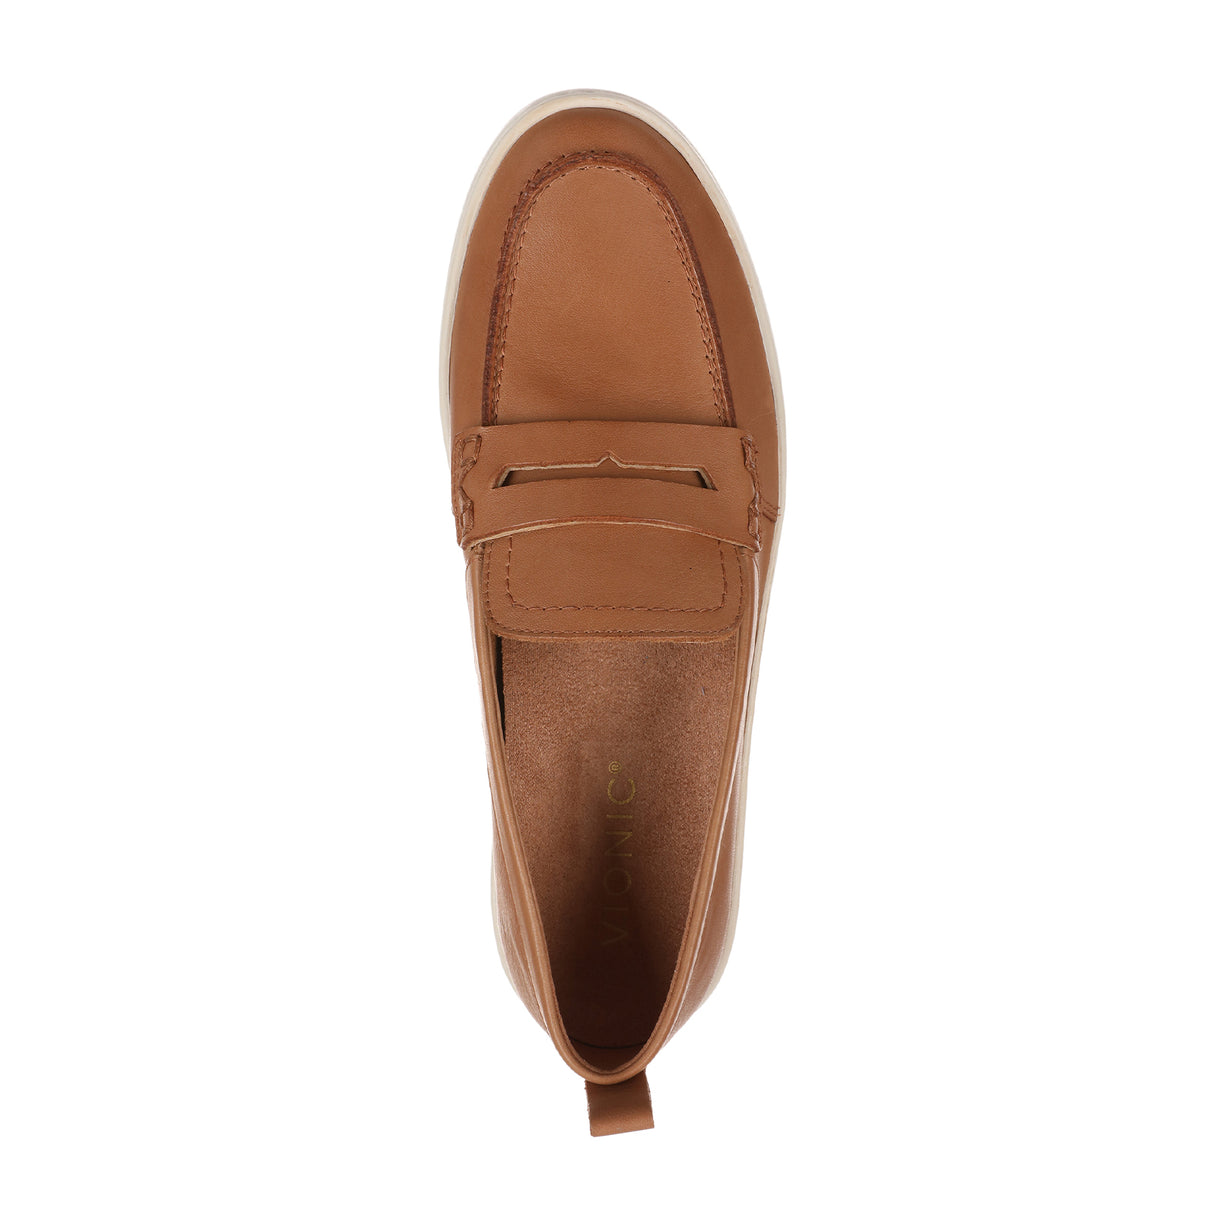 Vionic Uptown Slip On (Women) - Brown Leather Athletic - Casual - Slip On - The Heel Shoe Fitters